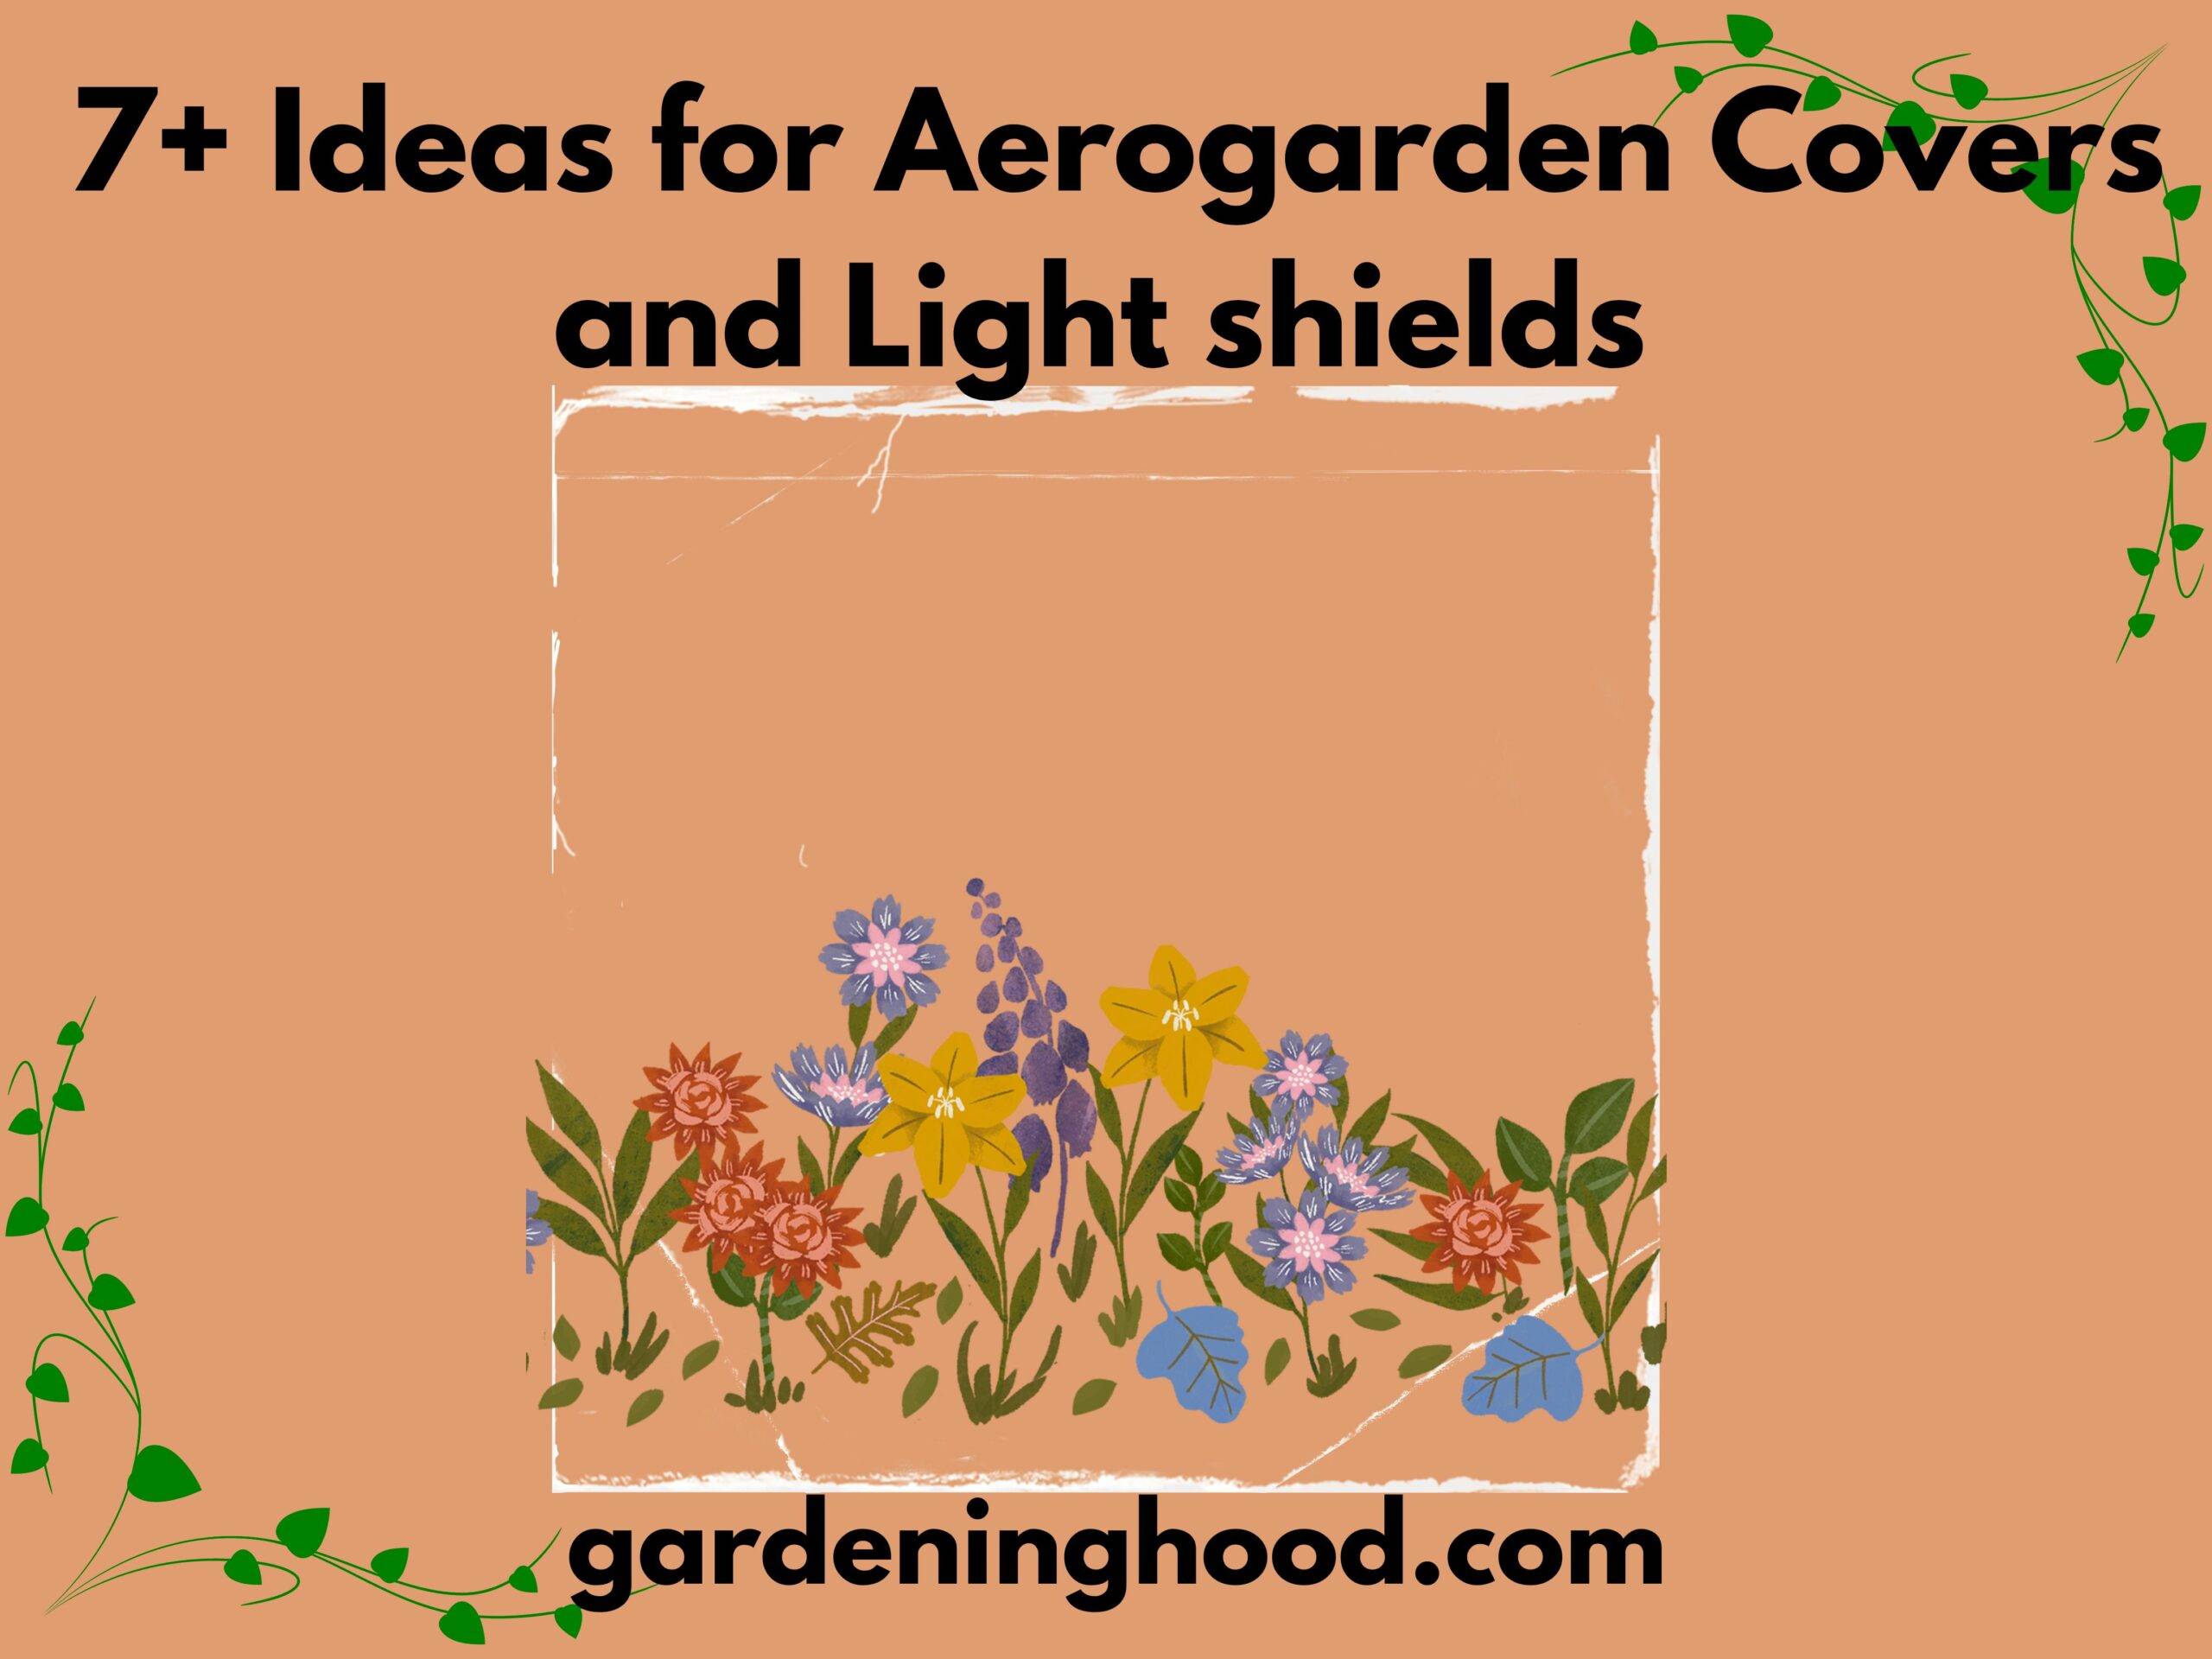 7+ Ideas for Aerogarden Covers and Light shields 